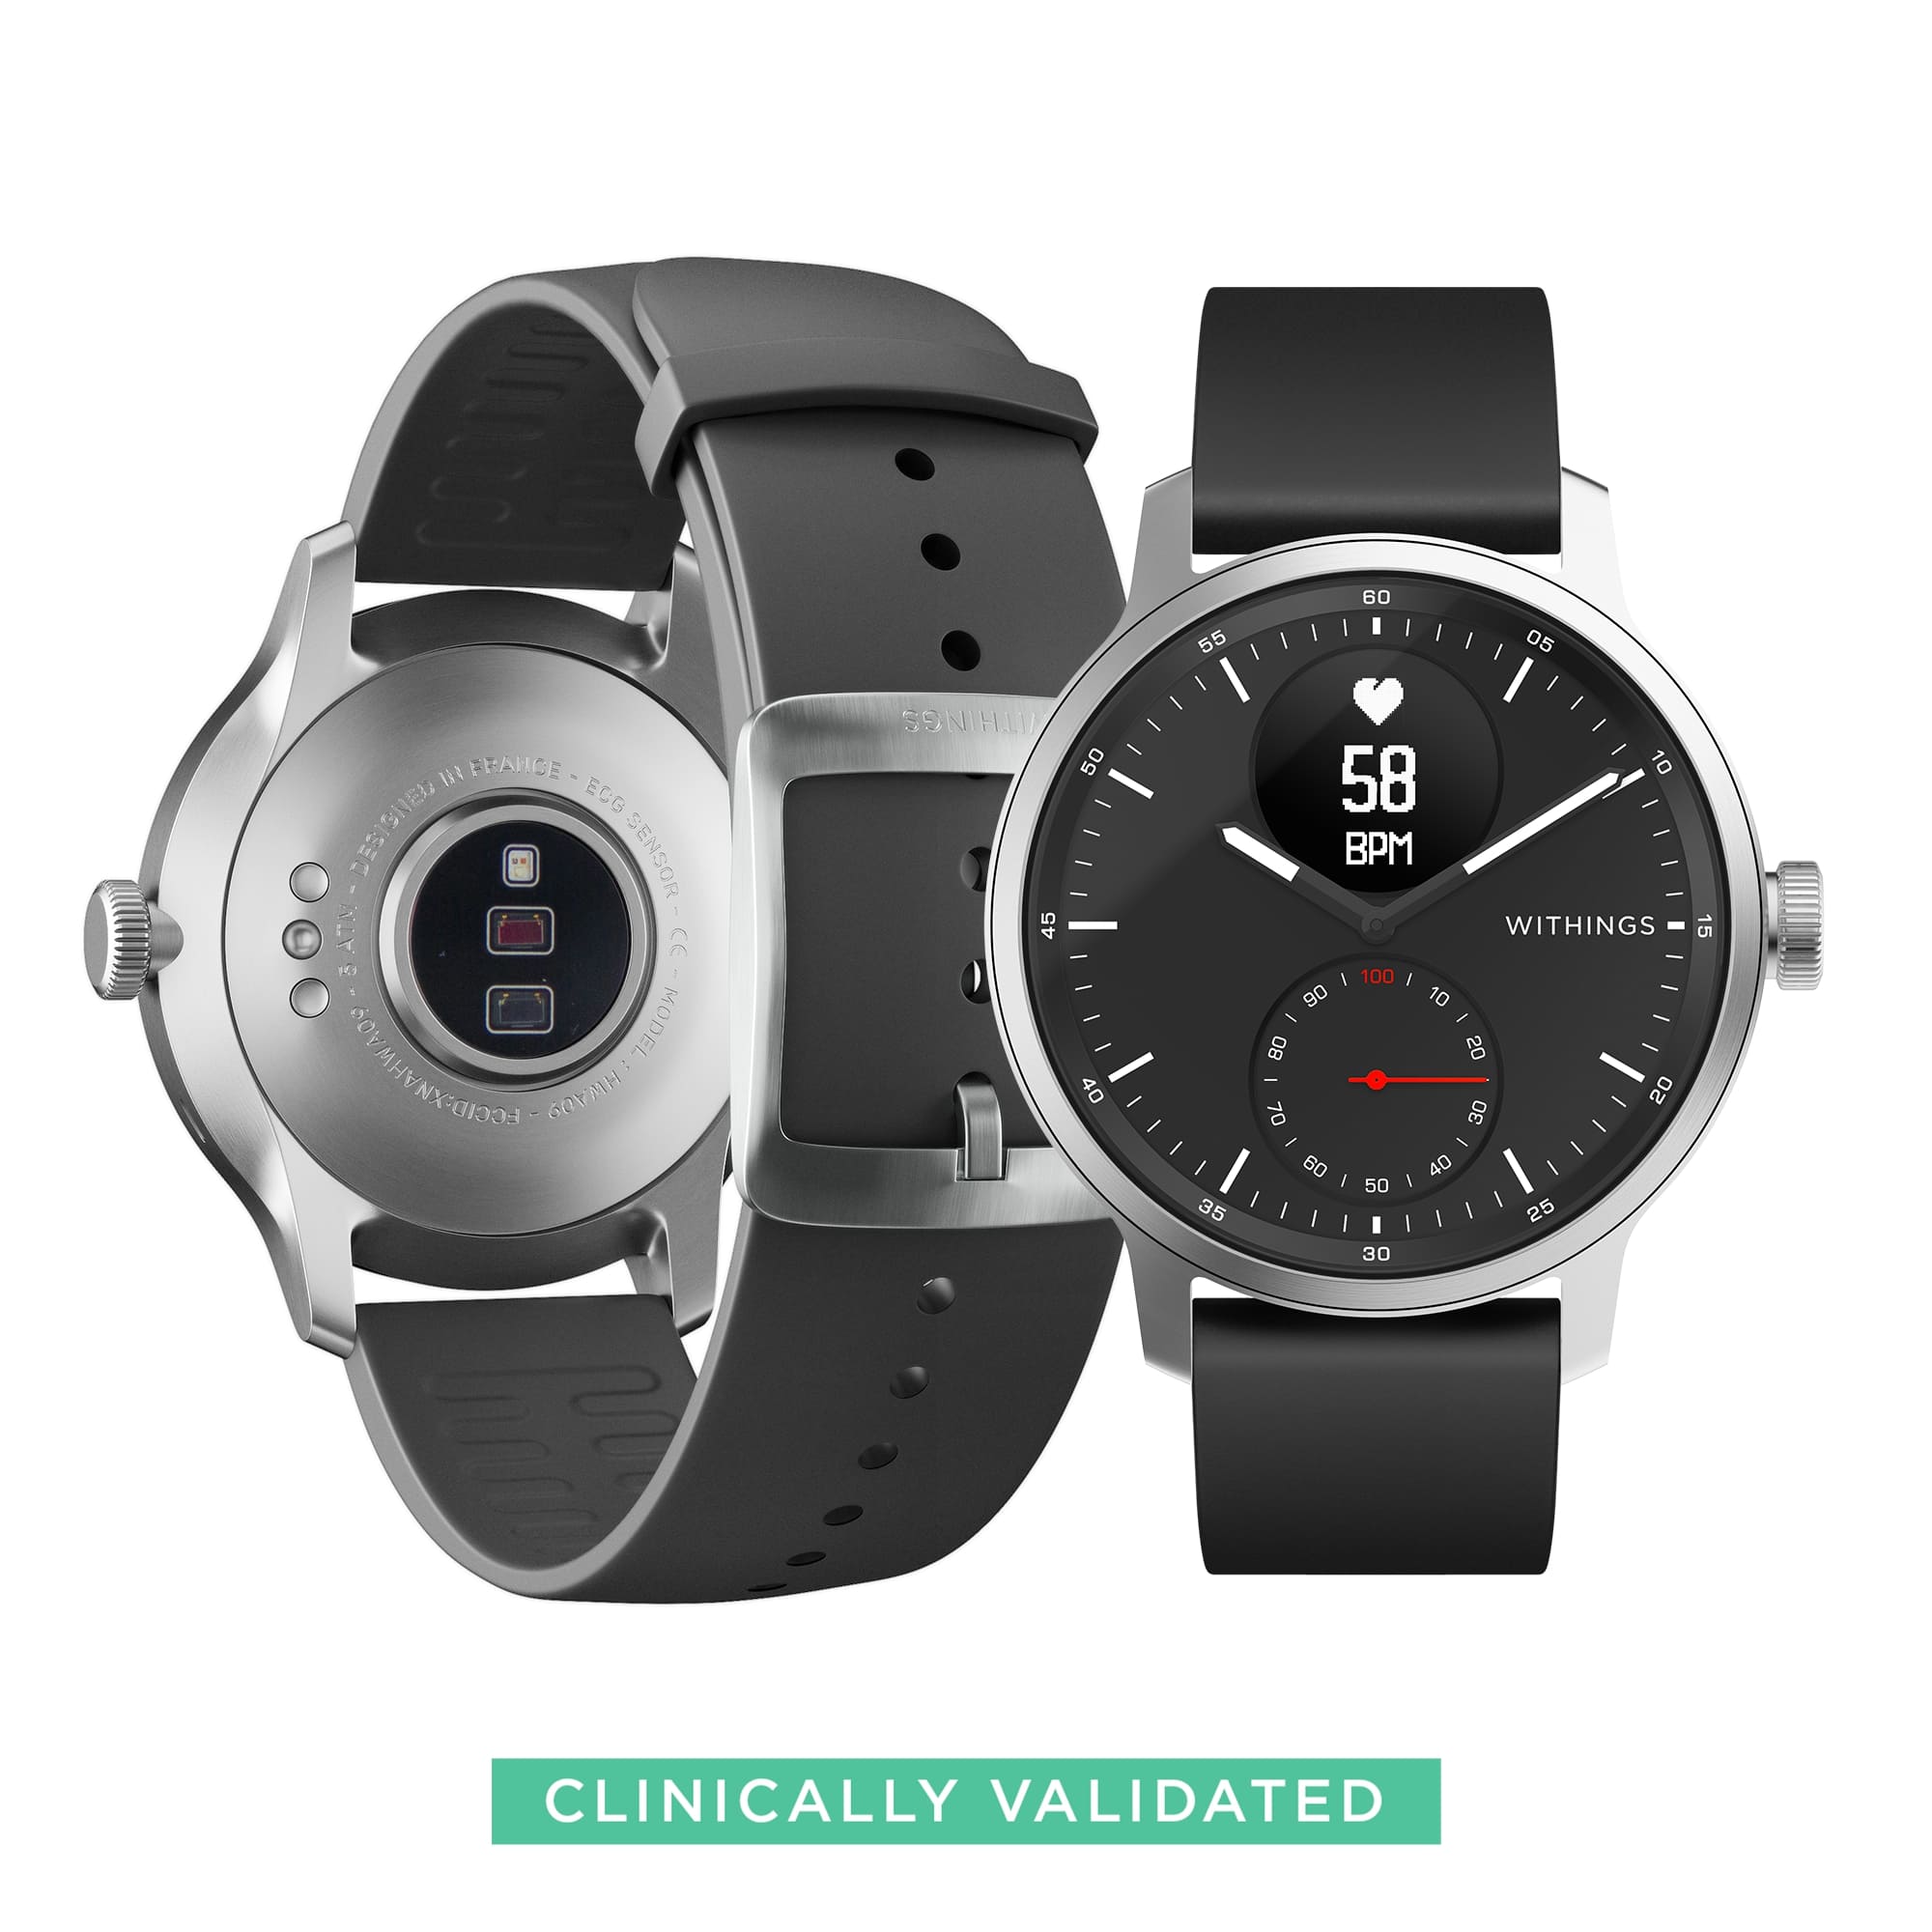 Picture of Withings Scanwatch 42mm Black